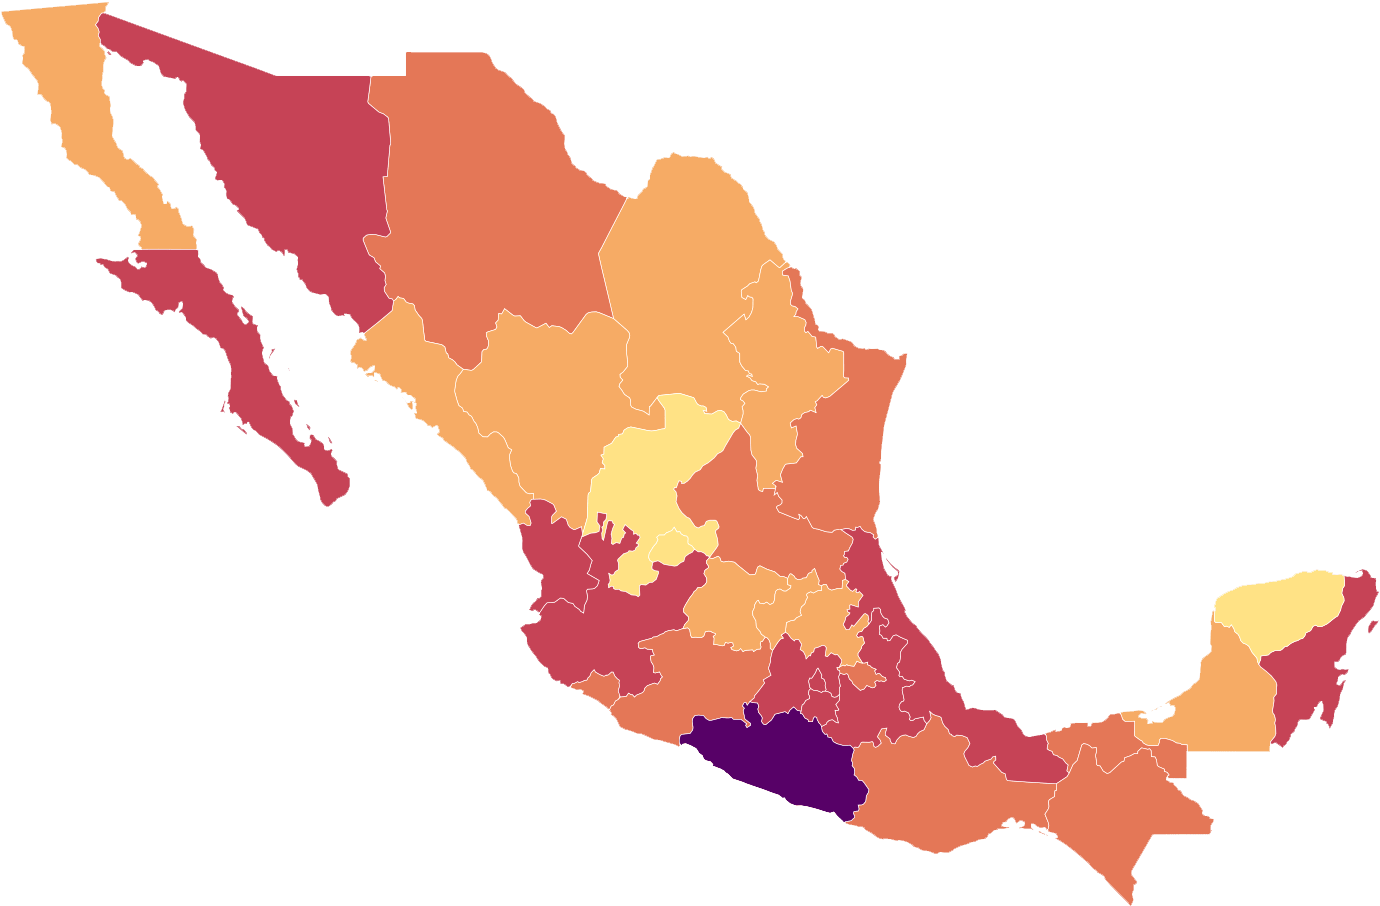 Mexico Color Coded Map PNG image